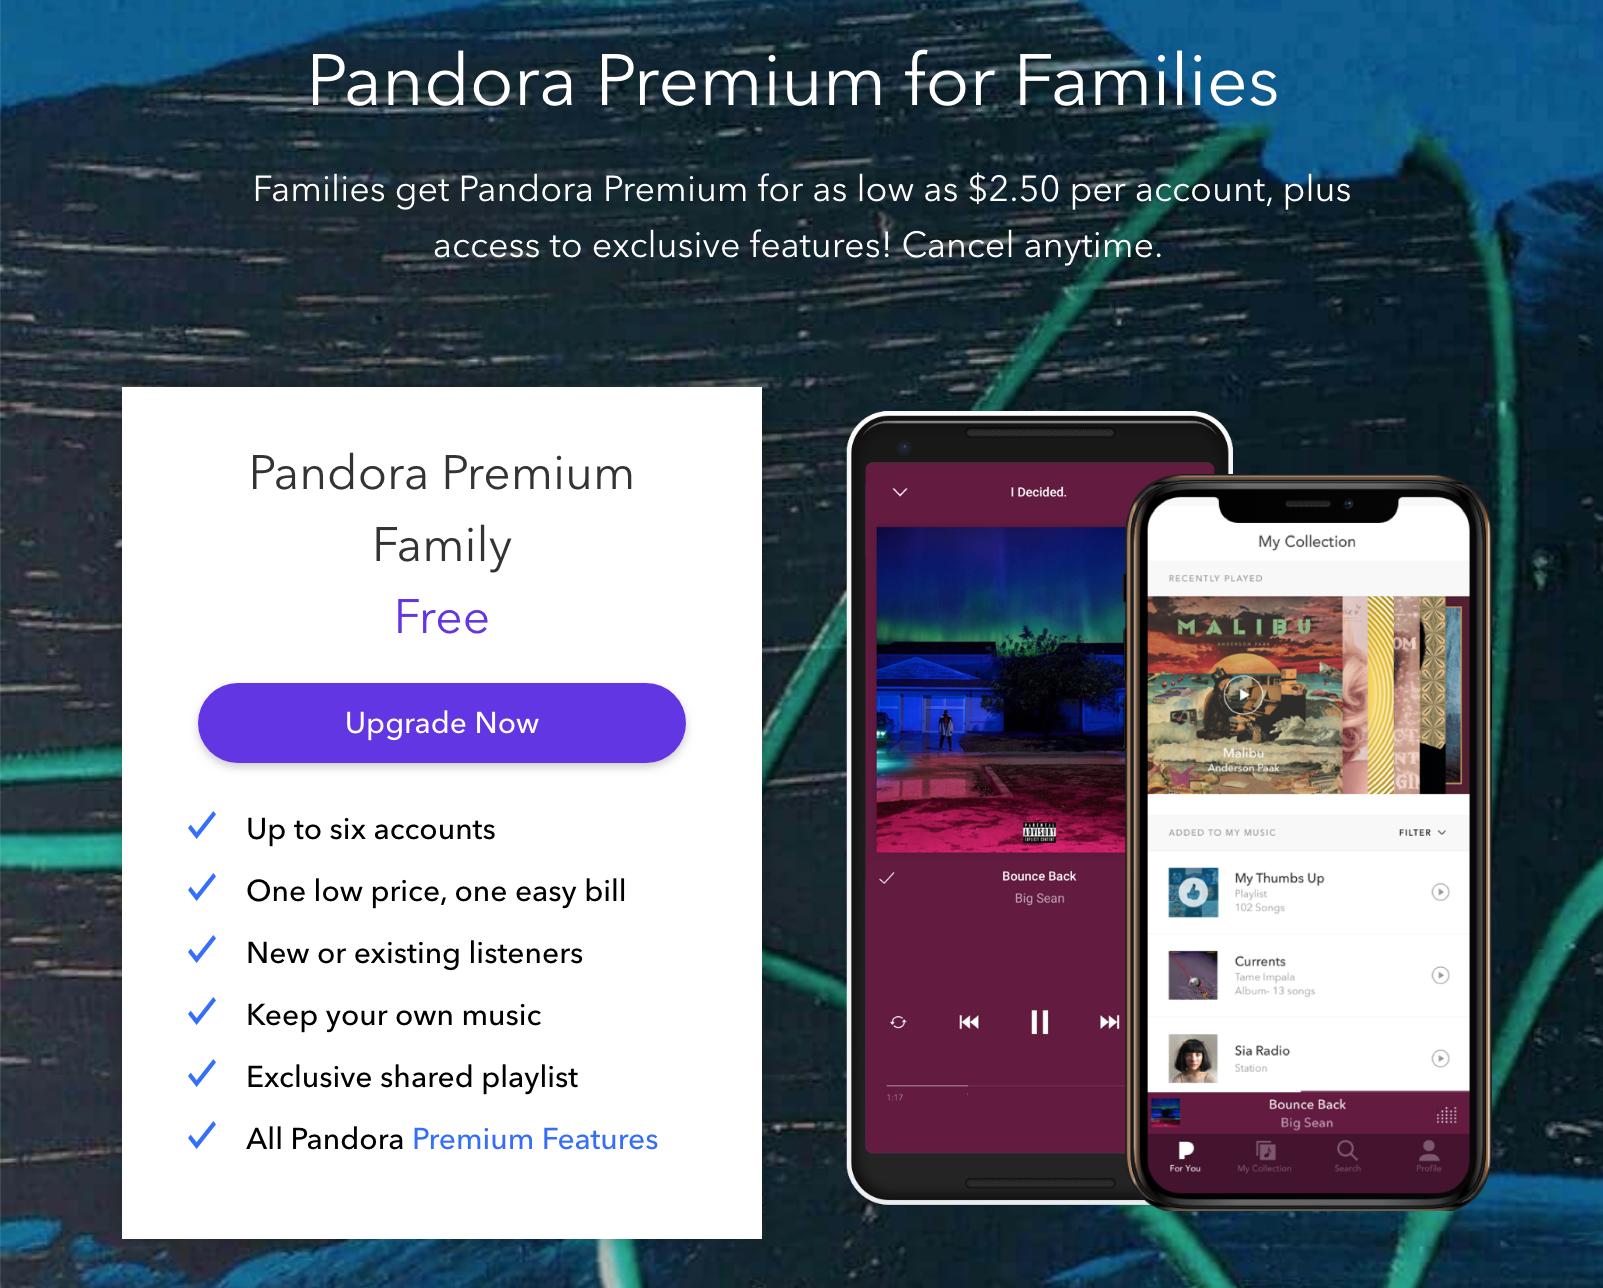 How to stream Pandora on multiple devices simultaneously?